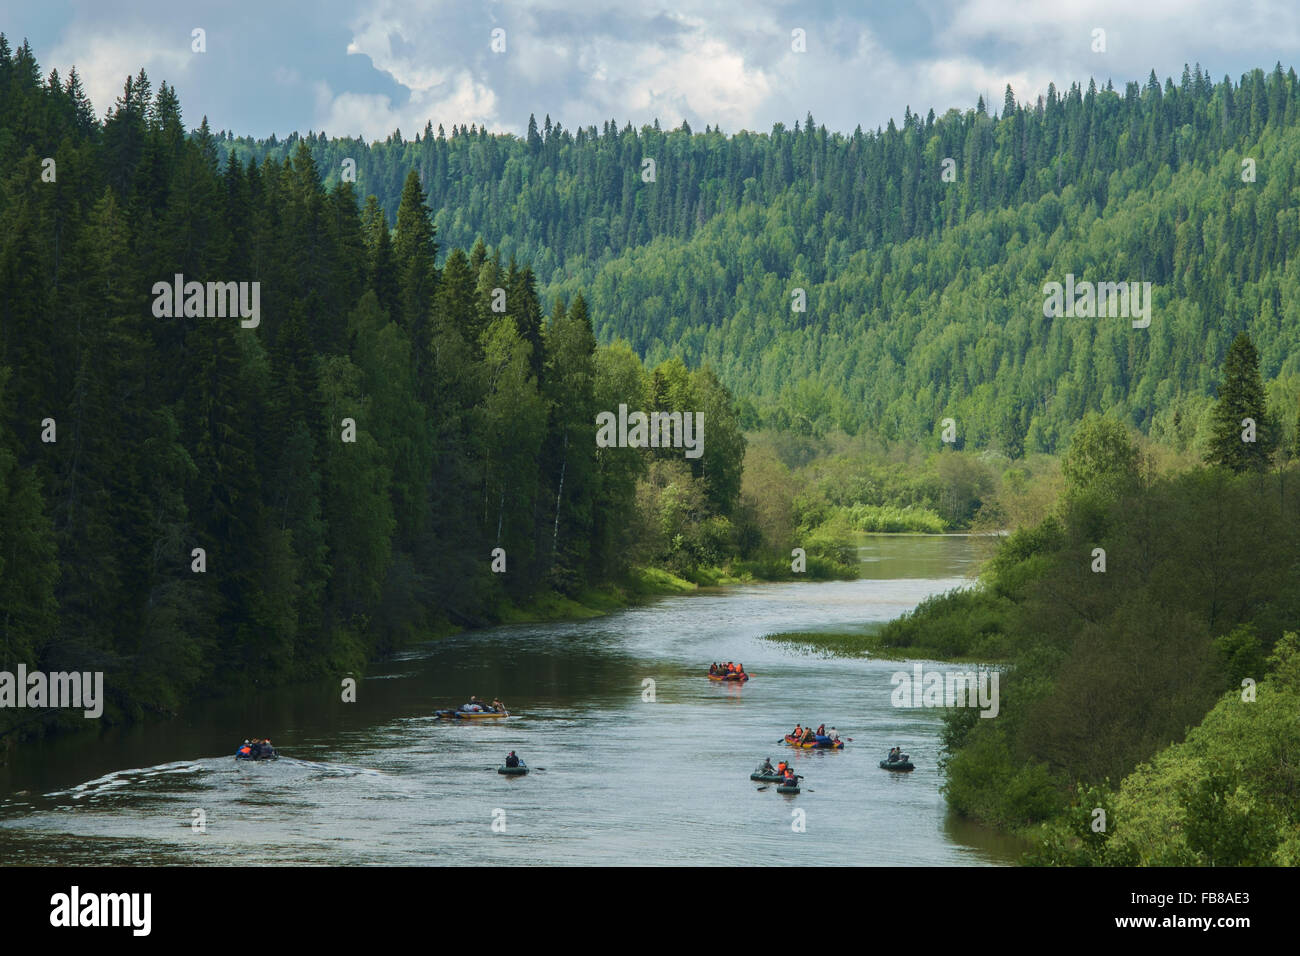 Mountains river and rafts Stock Photo